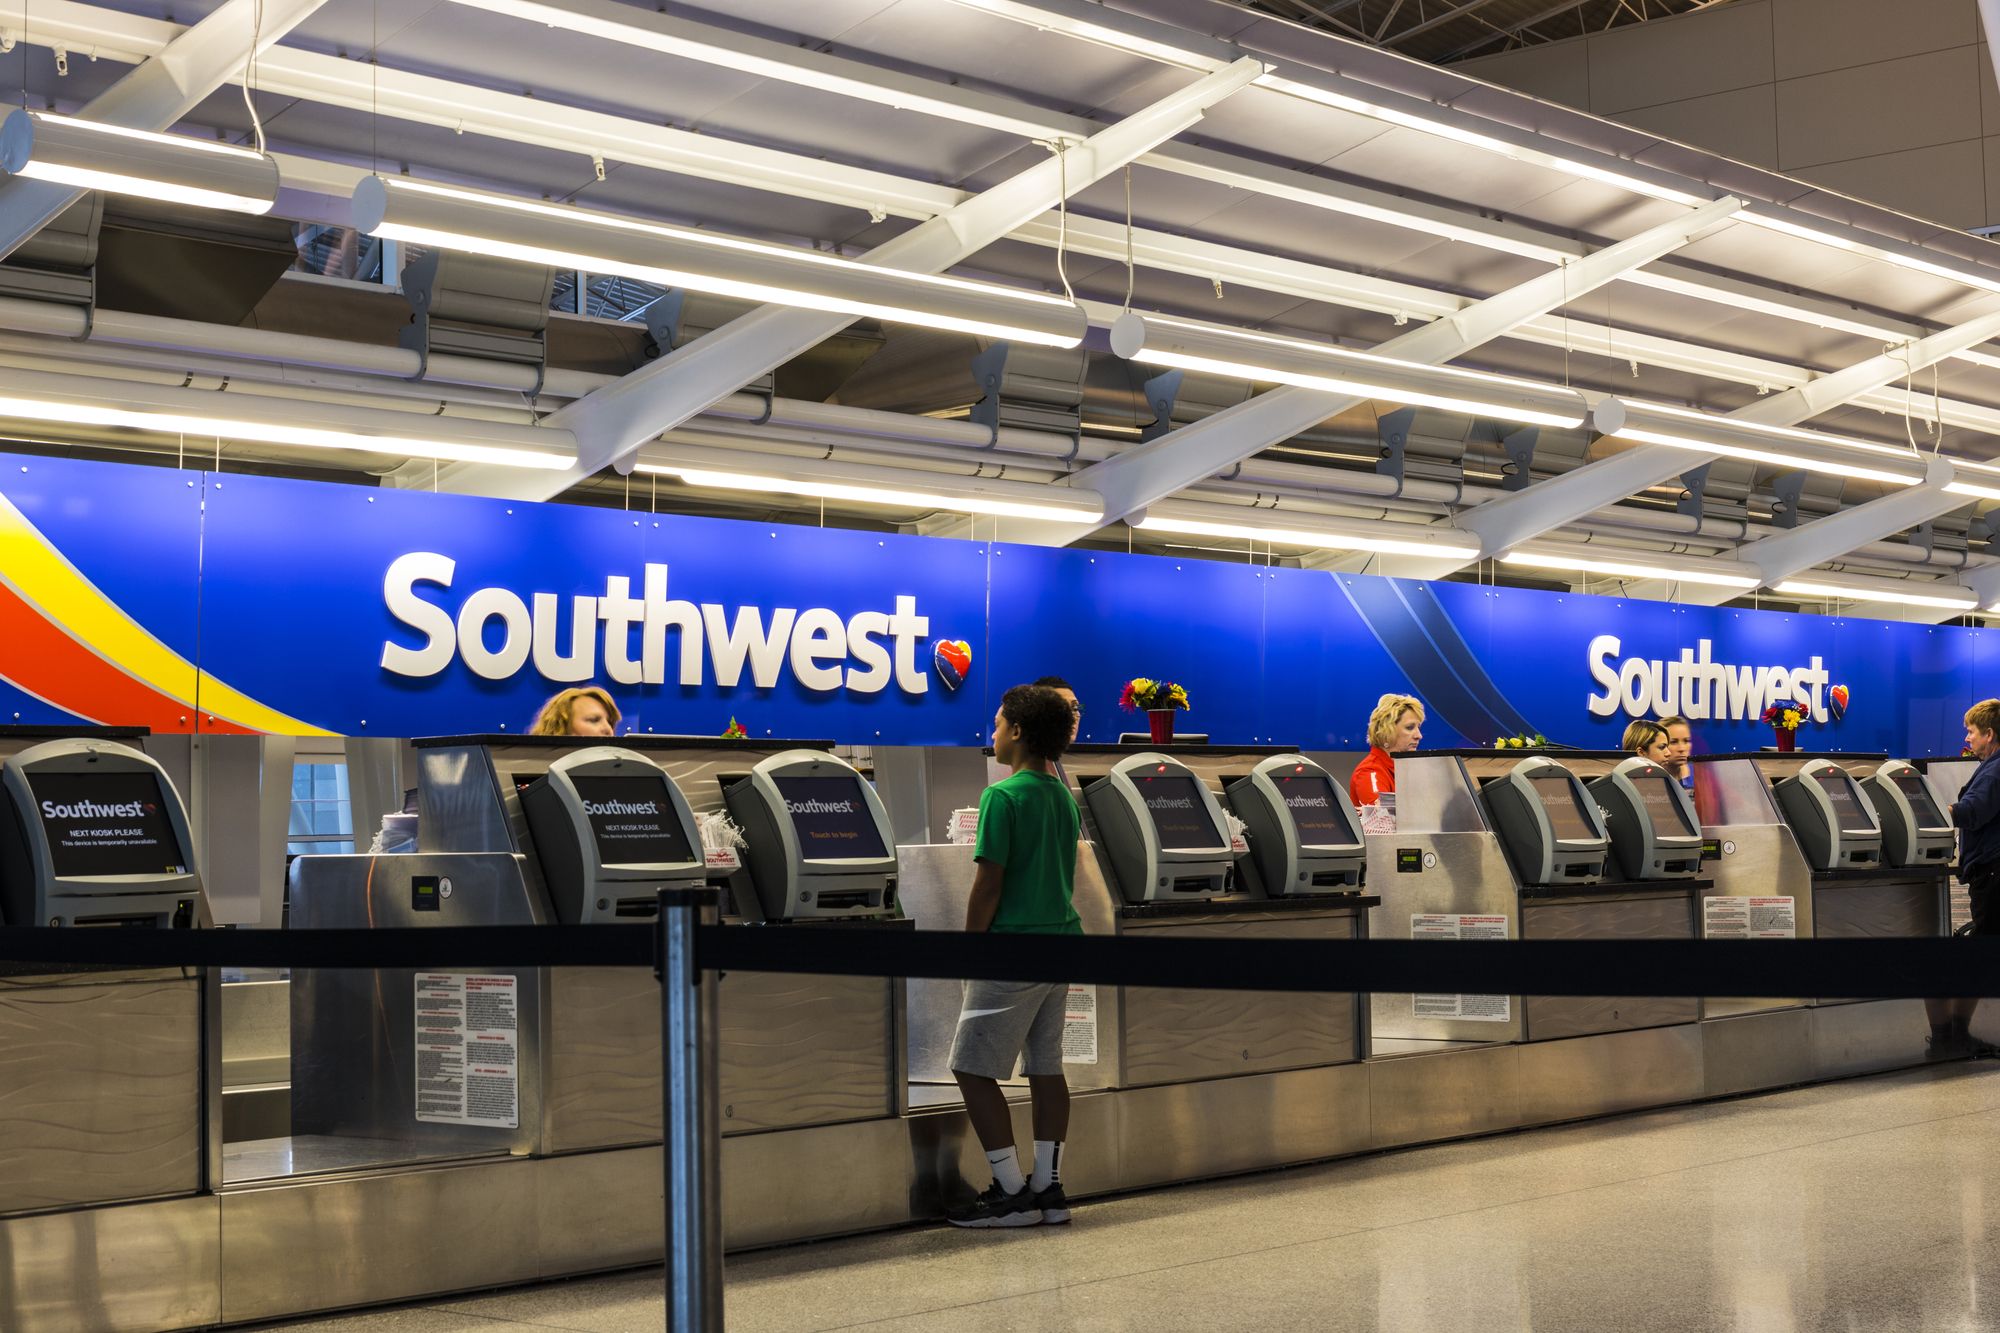 Las Vegas - Circa July 2017: Southwest Airlines Check In desk preparing passengers for departure. Southwest is the largest low-cost carrier in the world IV